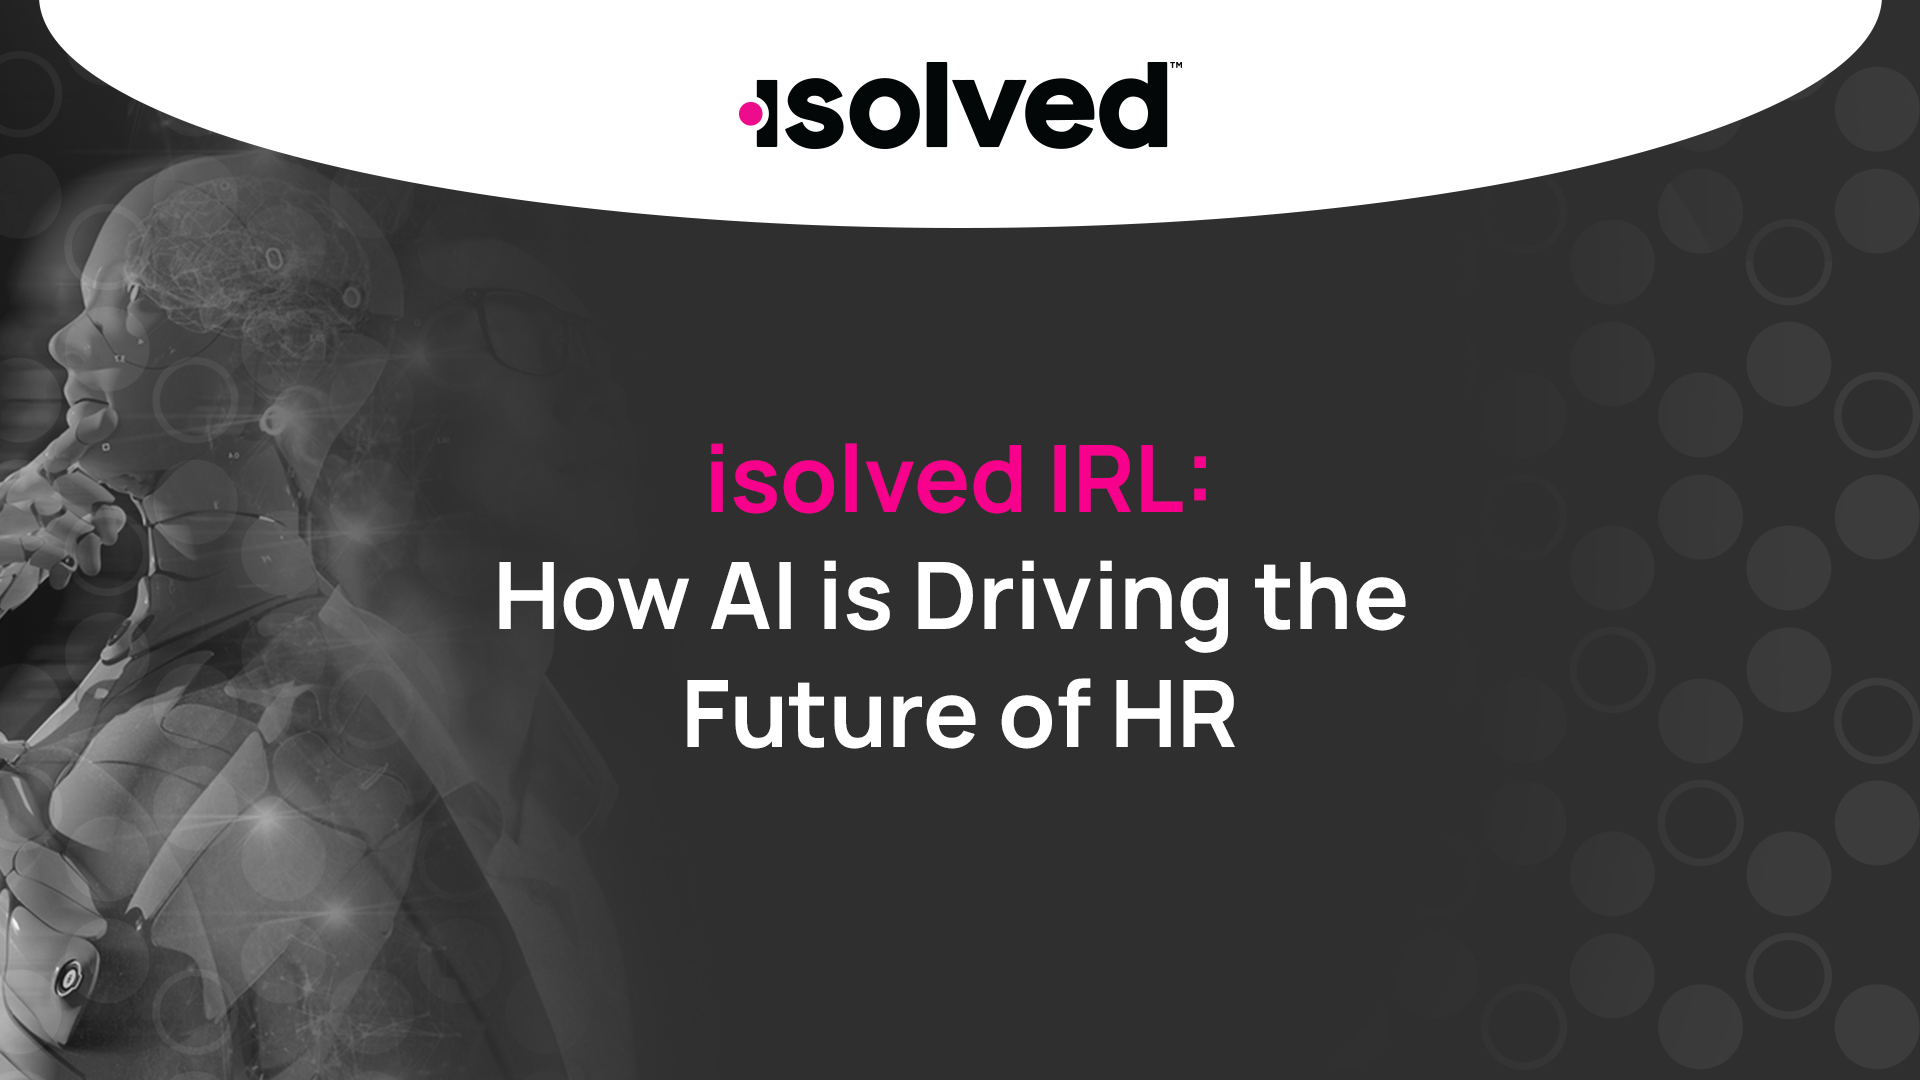 isolved IRL: How AI is Driving the Future of HR